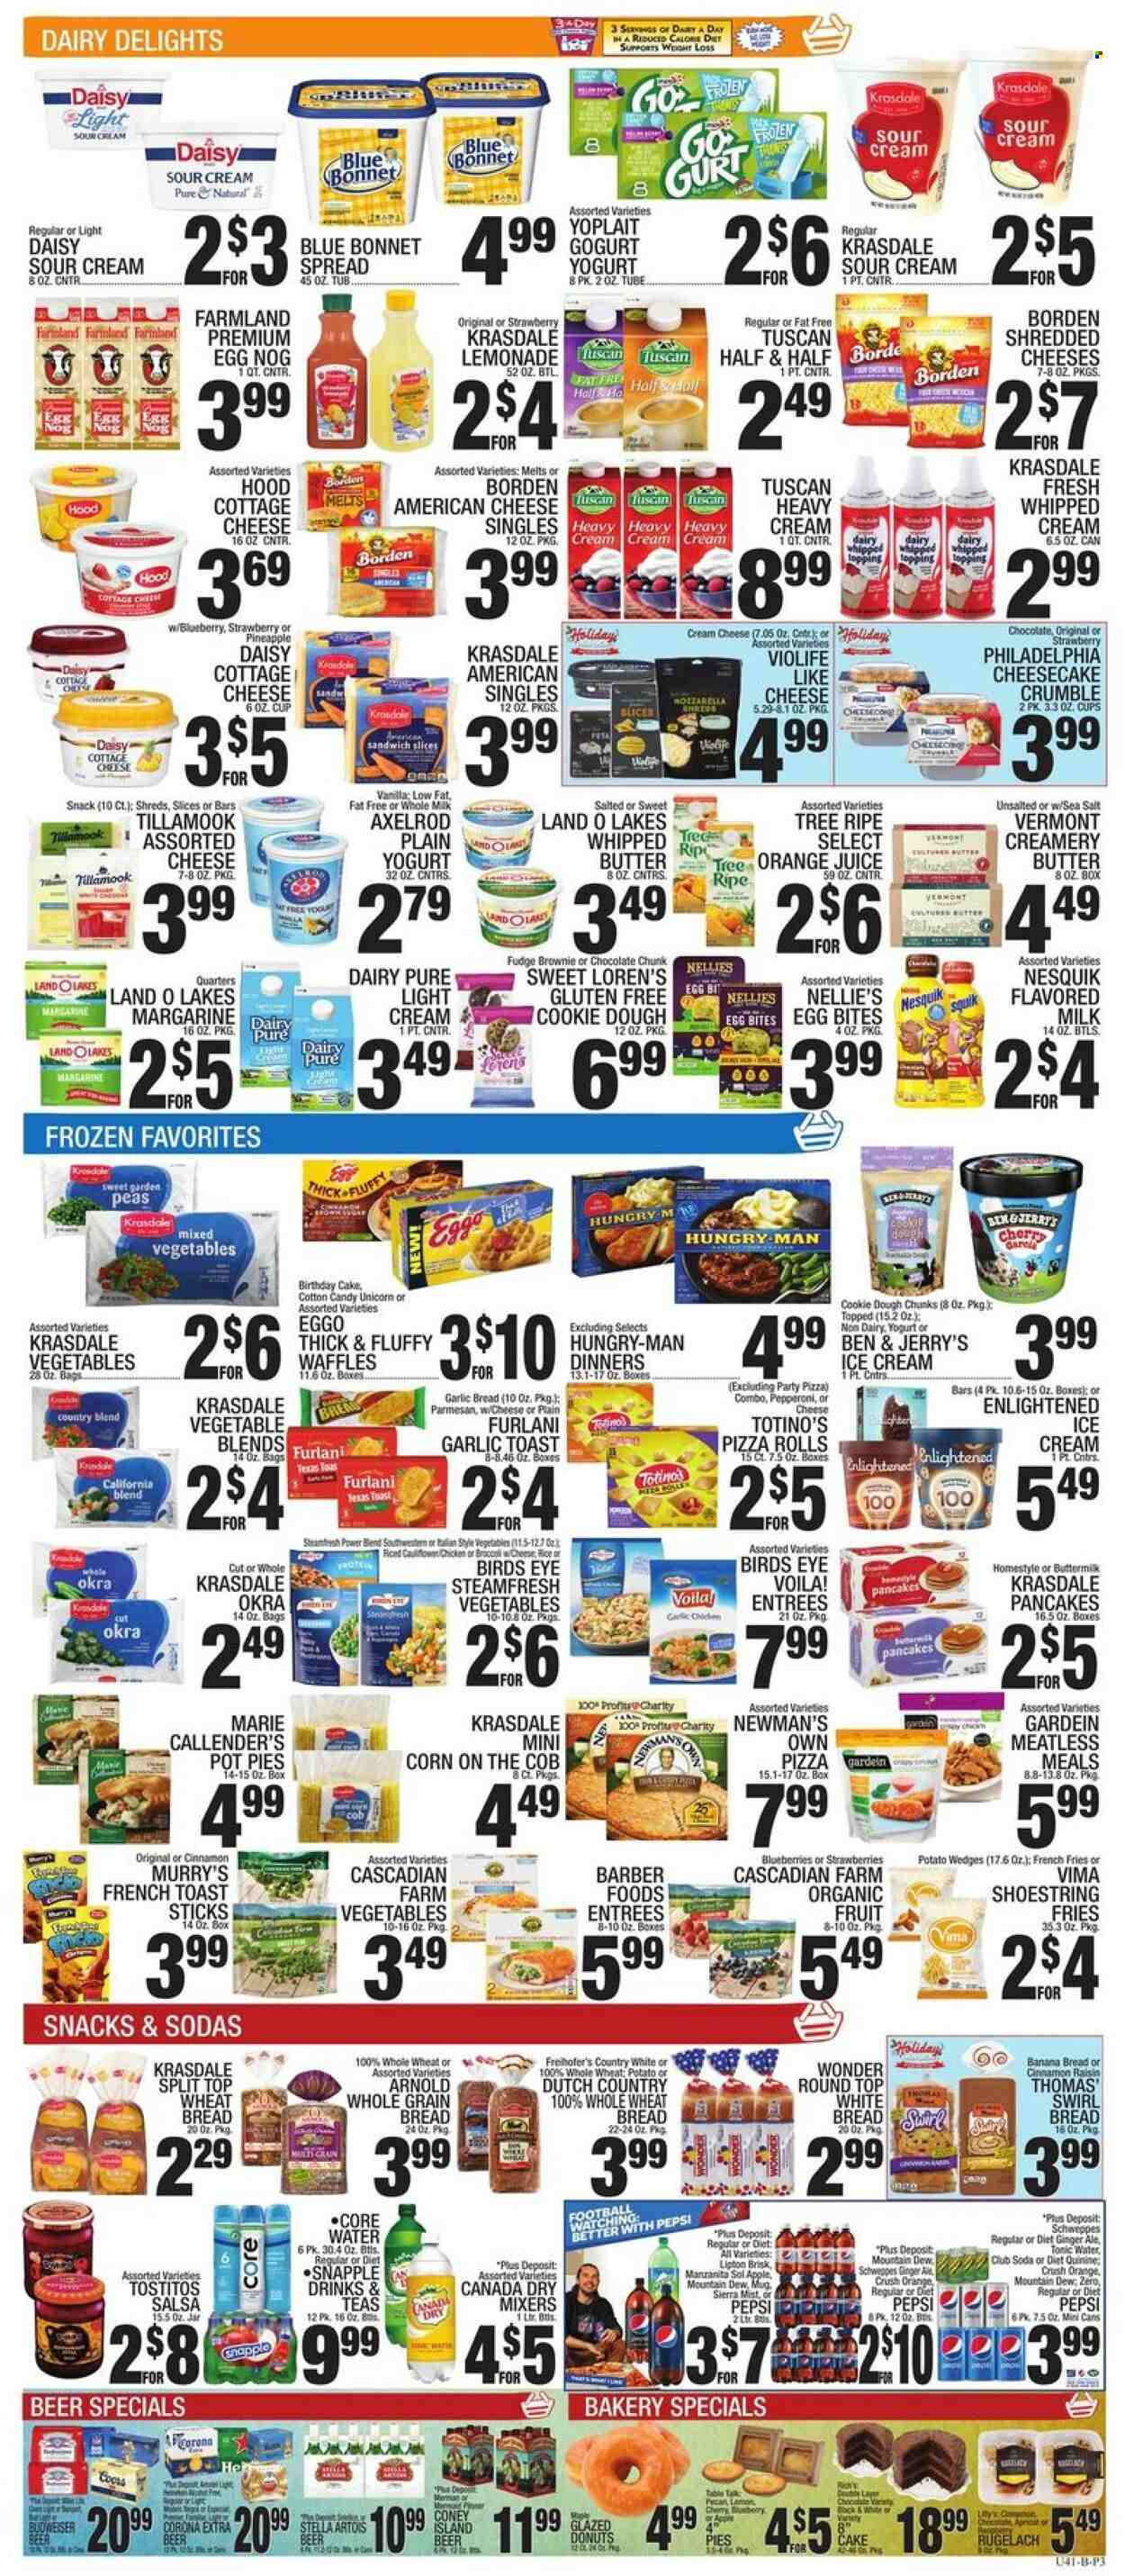 thumbnail - C-Town Flyer - 12/02/2022 - 12/08/2022 - Sales products - wheat bread, white bread, cake, pizza rolls, pot pie, donut, banana bread, waffles, broccoli, corn, peas, blueberries, strawberries, pizza, sandwich, Bird's Eye, Marie Callender's, pepperoni, american cheese, cottage cheese, cream cheese, sandwich slices, Philadelphia, parmesan, yoghurt, Nesquik, Yoplait, buttermilk, flavoured milk, eggs, margarine, sour cream, whipped cream, ice cream, Ben & Jerry's, Enlightened lce Cream, mixed vegetables, potato fries, potato wedges, french fries, cookie dough, fudge, snack, cotton candy, Tostitos, topping, salsa, Canada Dry, ginger ale, lemonade, Mountain Dew, Schweppes, Pepsi, orange juice, juice, Lipton, tonic, Diet Pepsi, Snapple, Sierra Mist, Club Soda, beer, Corona Extra, Sol, Budweiser, Stella Artois, Half and half, Coors. Page 3.